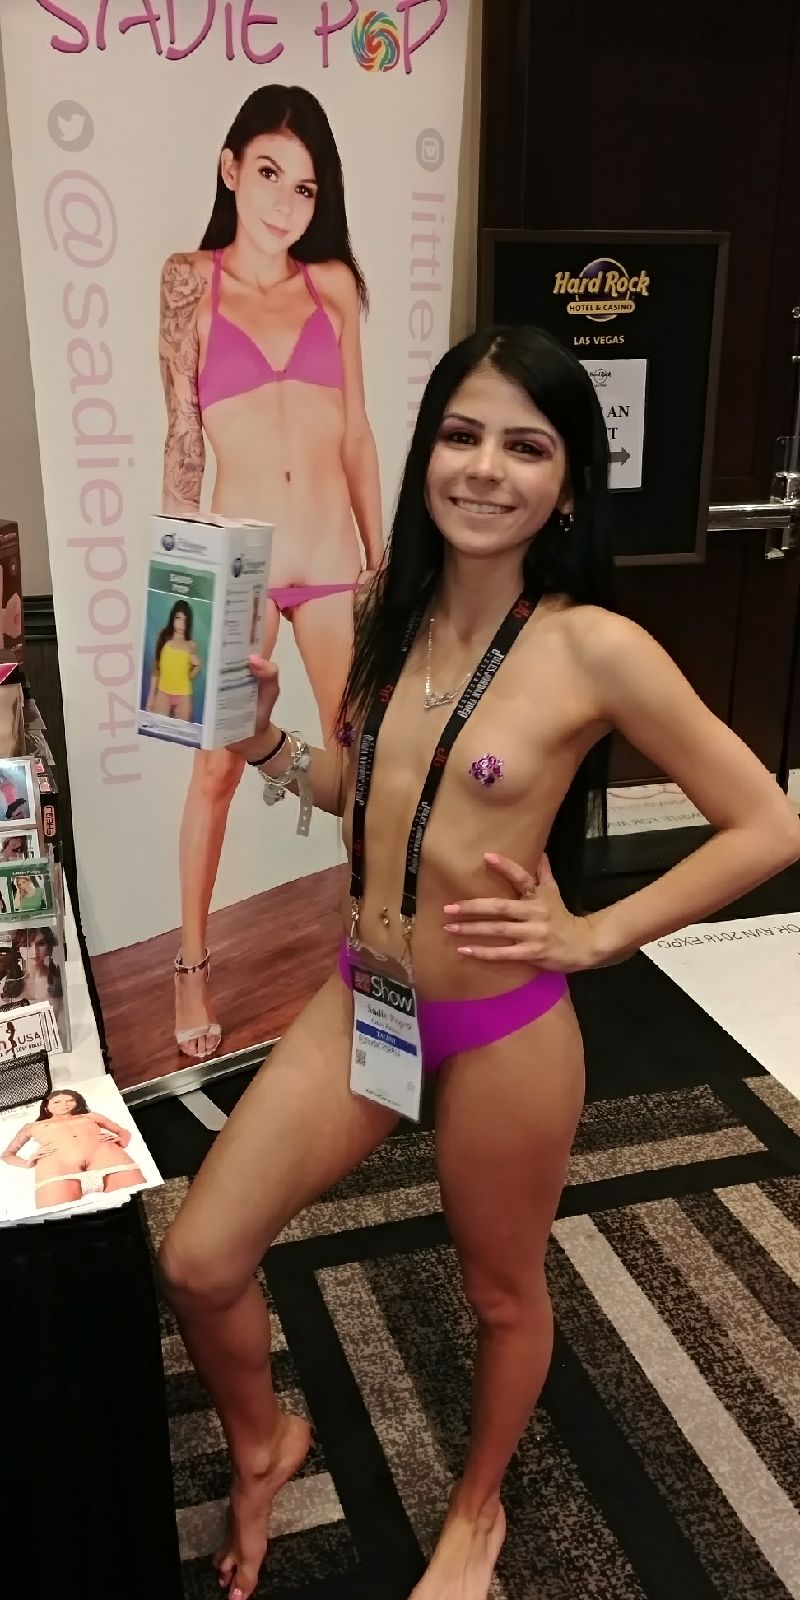 “Sadie Pop launches her first sex toy from pleasure products USA”